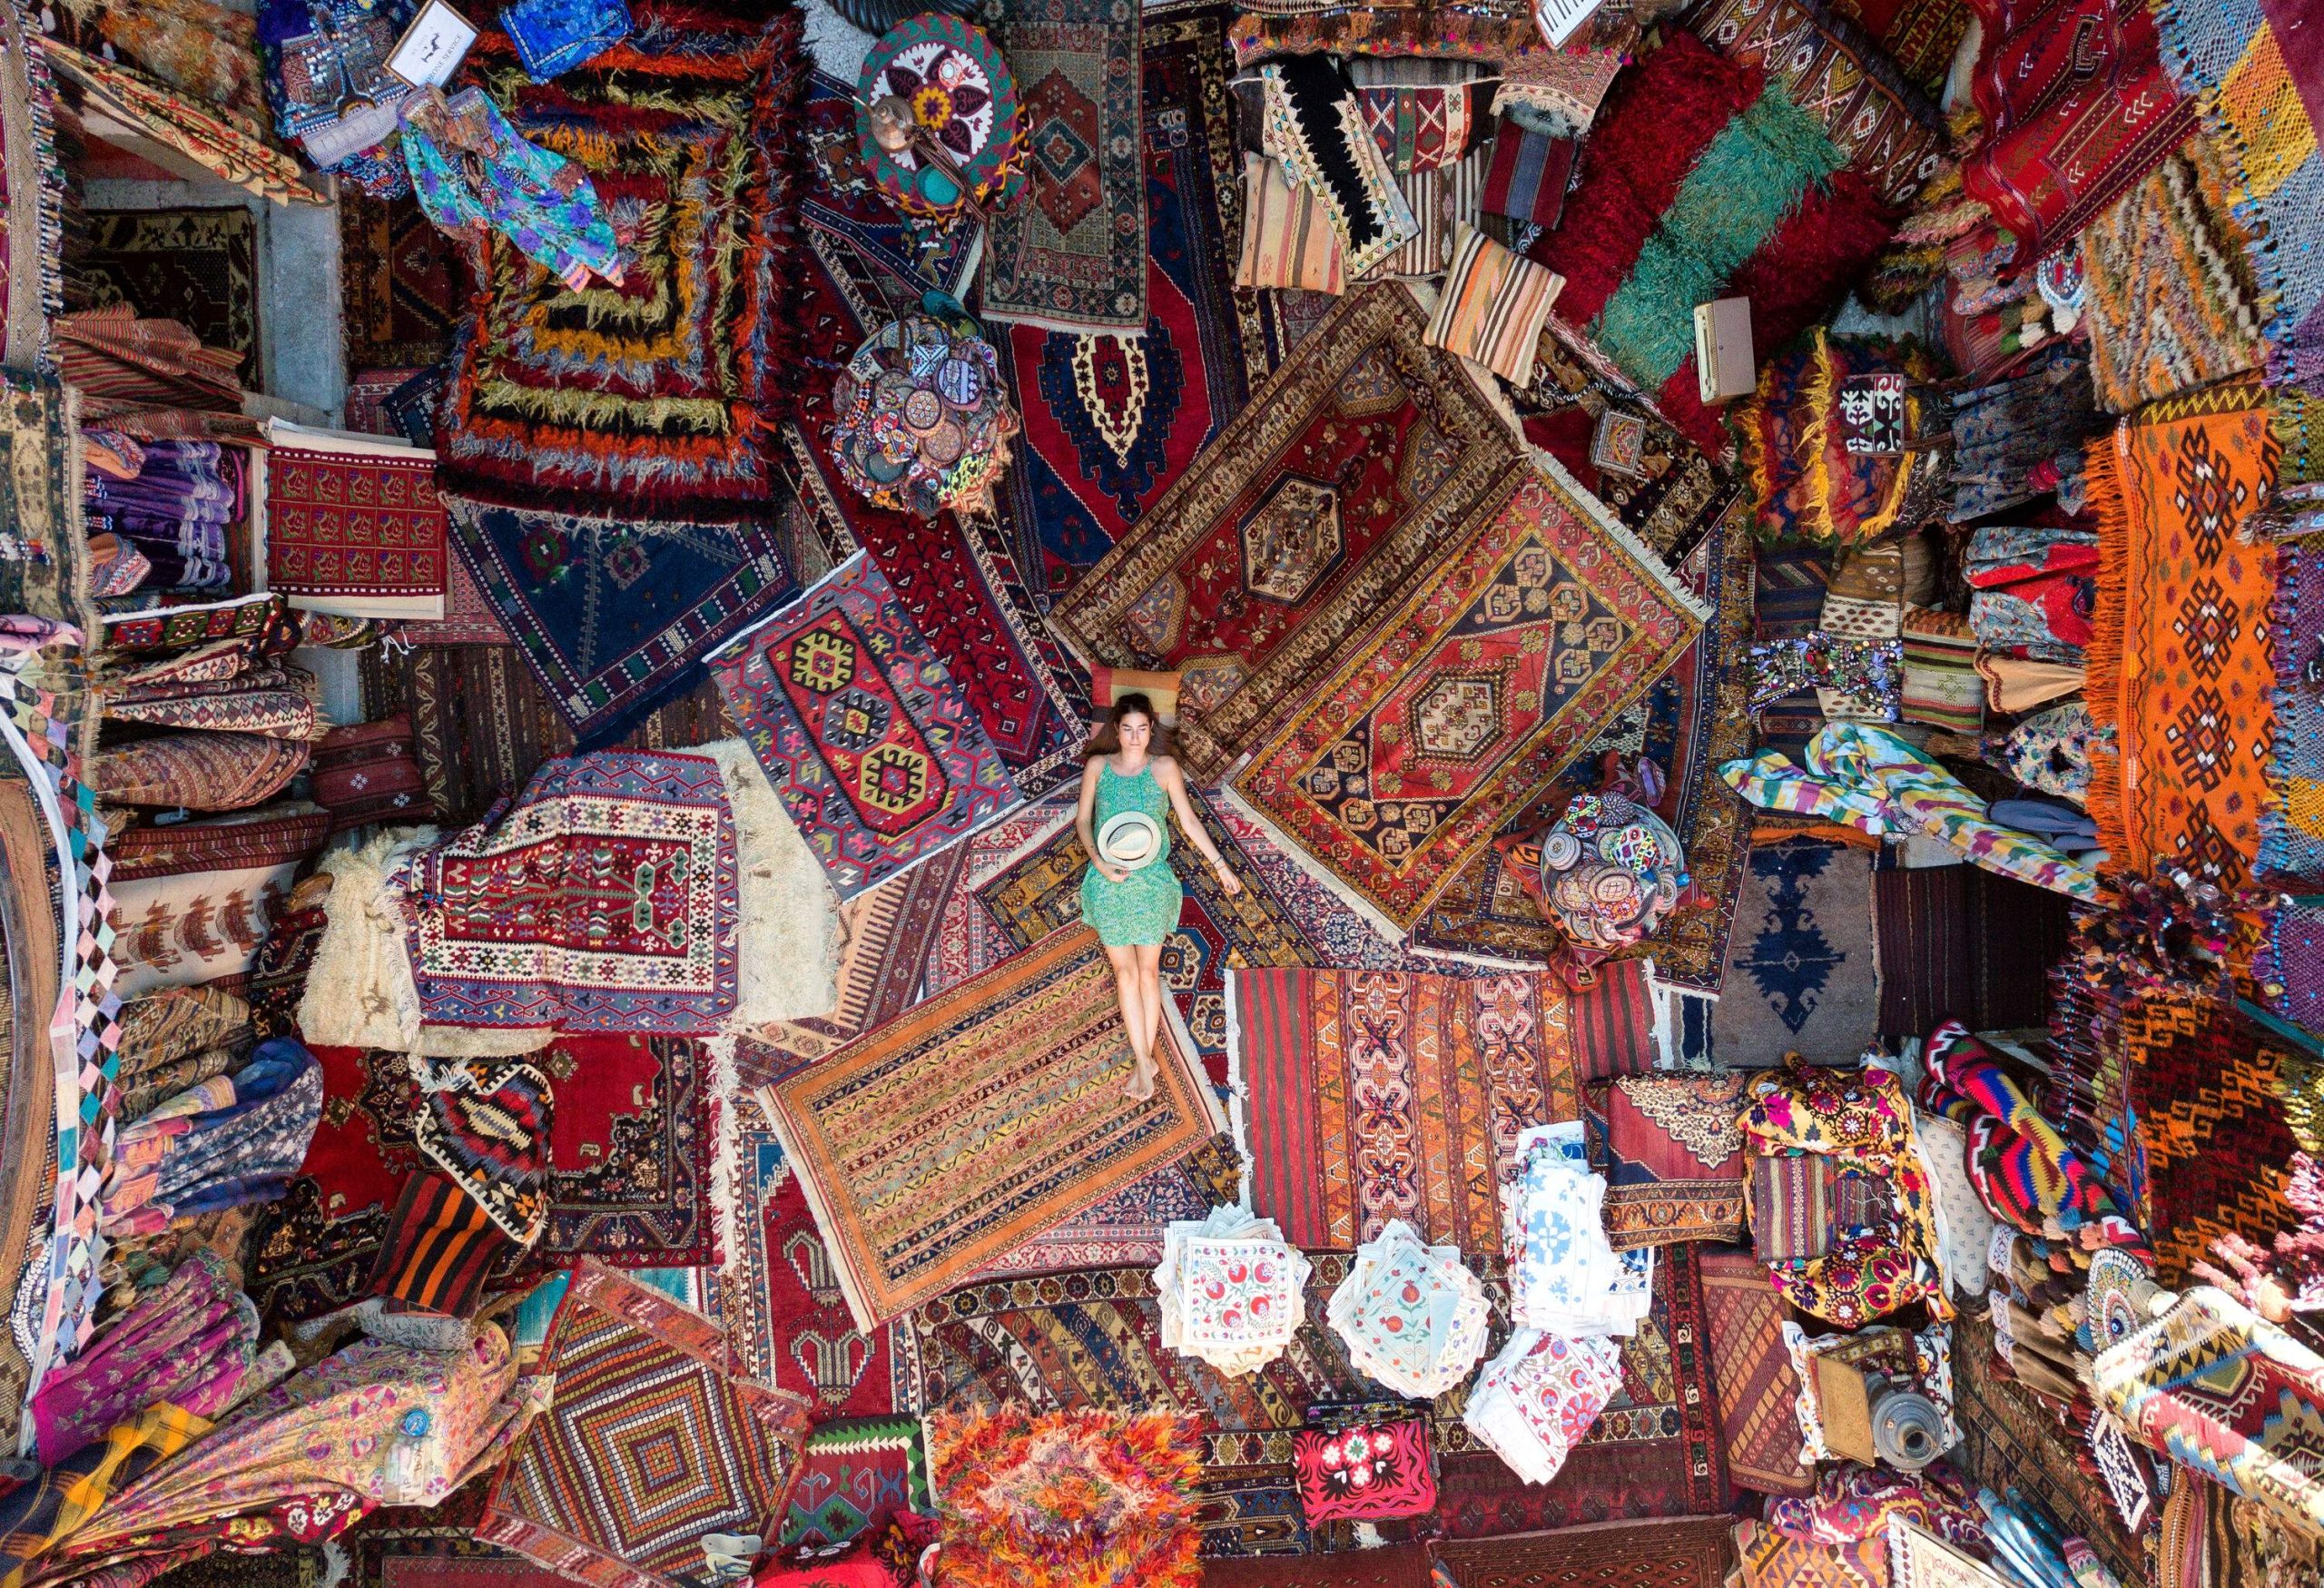 A person lies comfortably on a variety of intricately woven carpets within a vibrant carpet store.